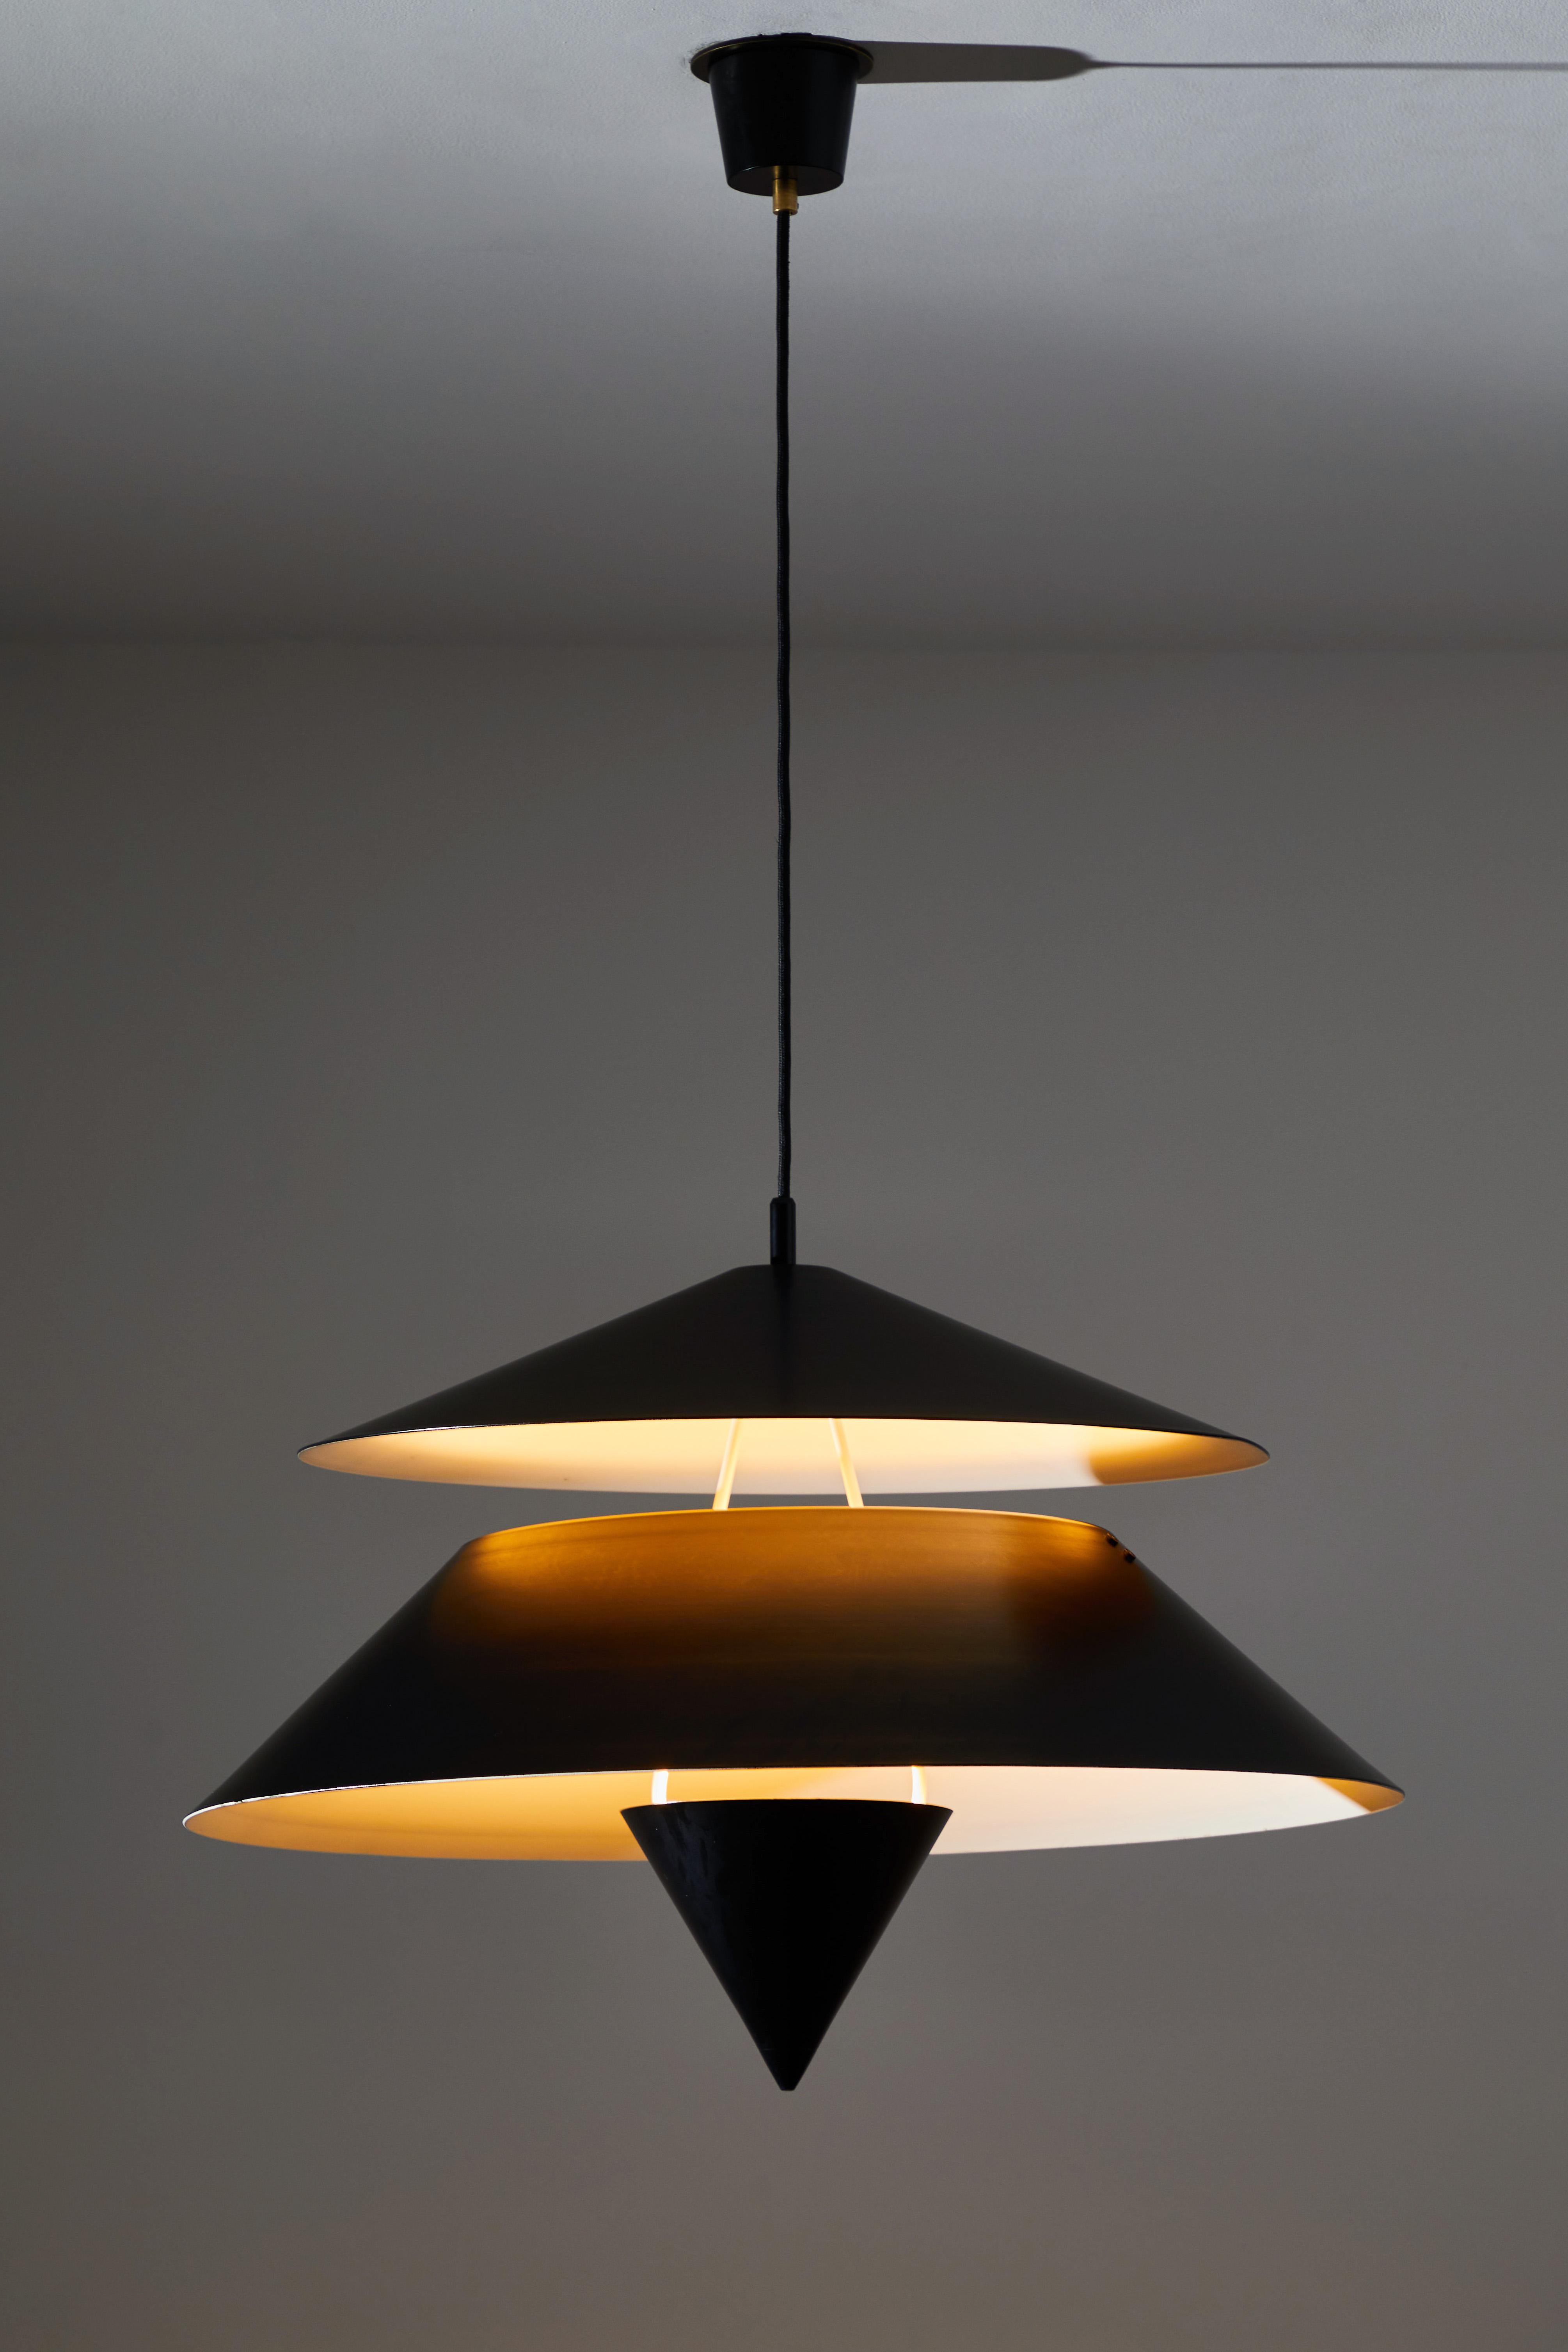 Akaari suspension light by Vico Magistretti for Oluce. Designed and manufactured in Italy, 1985. Enameled aluminum and metal. Provides uplight and downlight. Original canopy. Rewired for U.S. junction boxes. Takes two E27 75w maximum bulbs. Bulbs